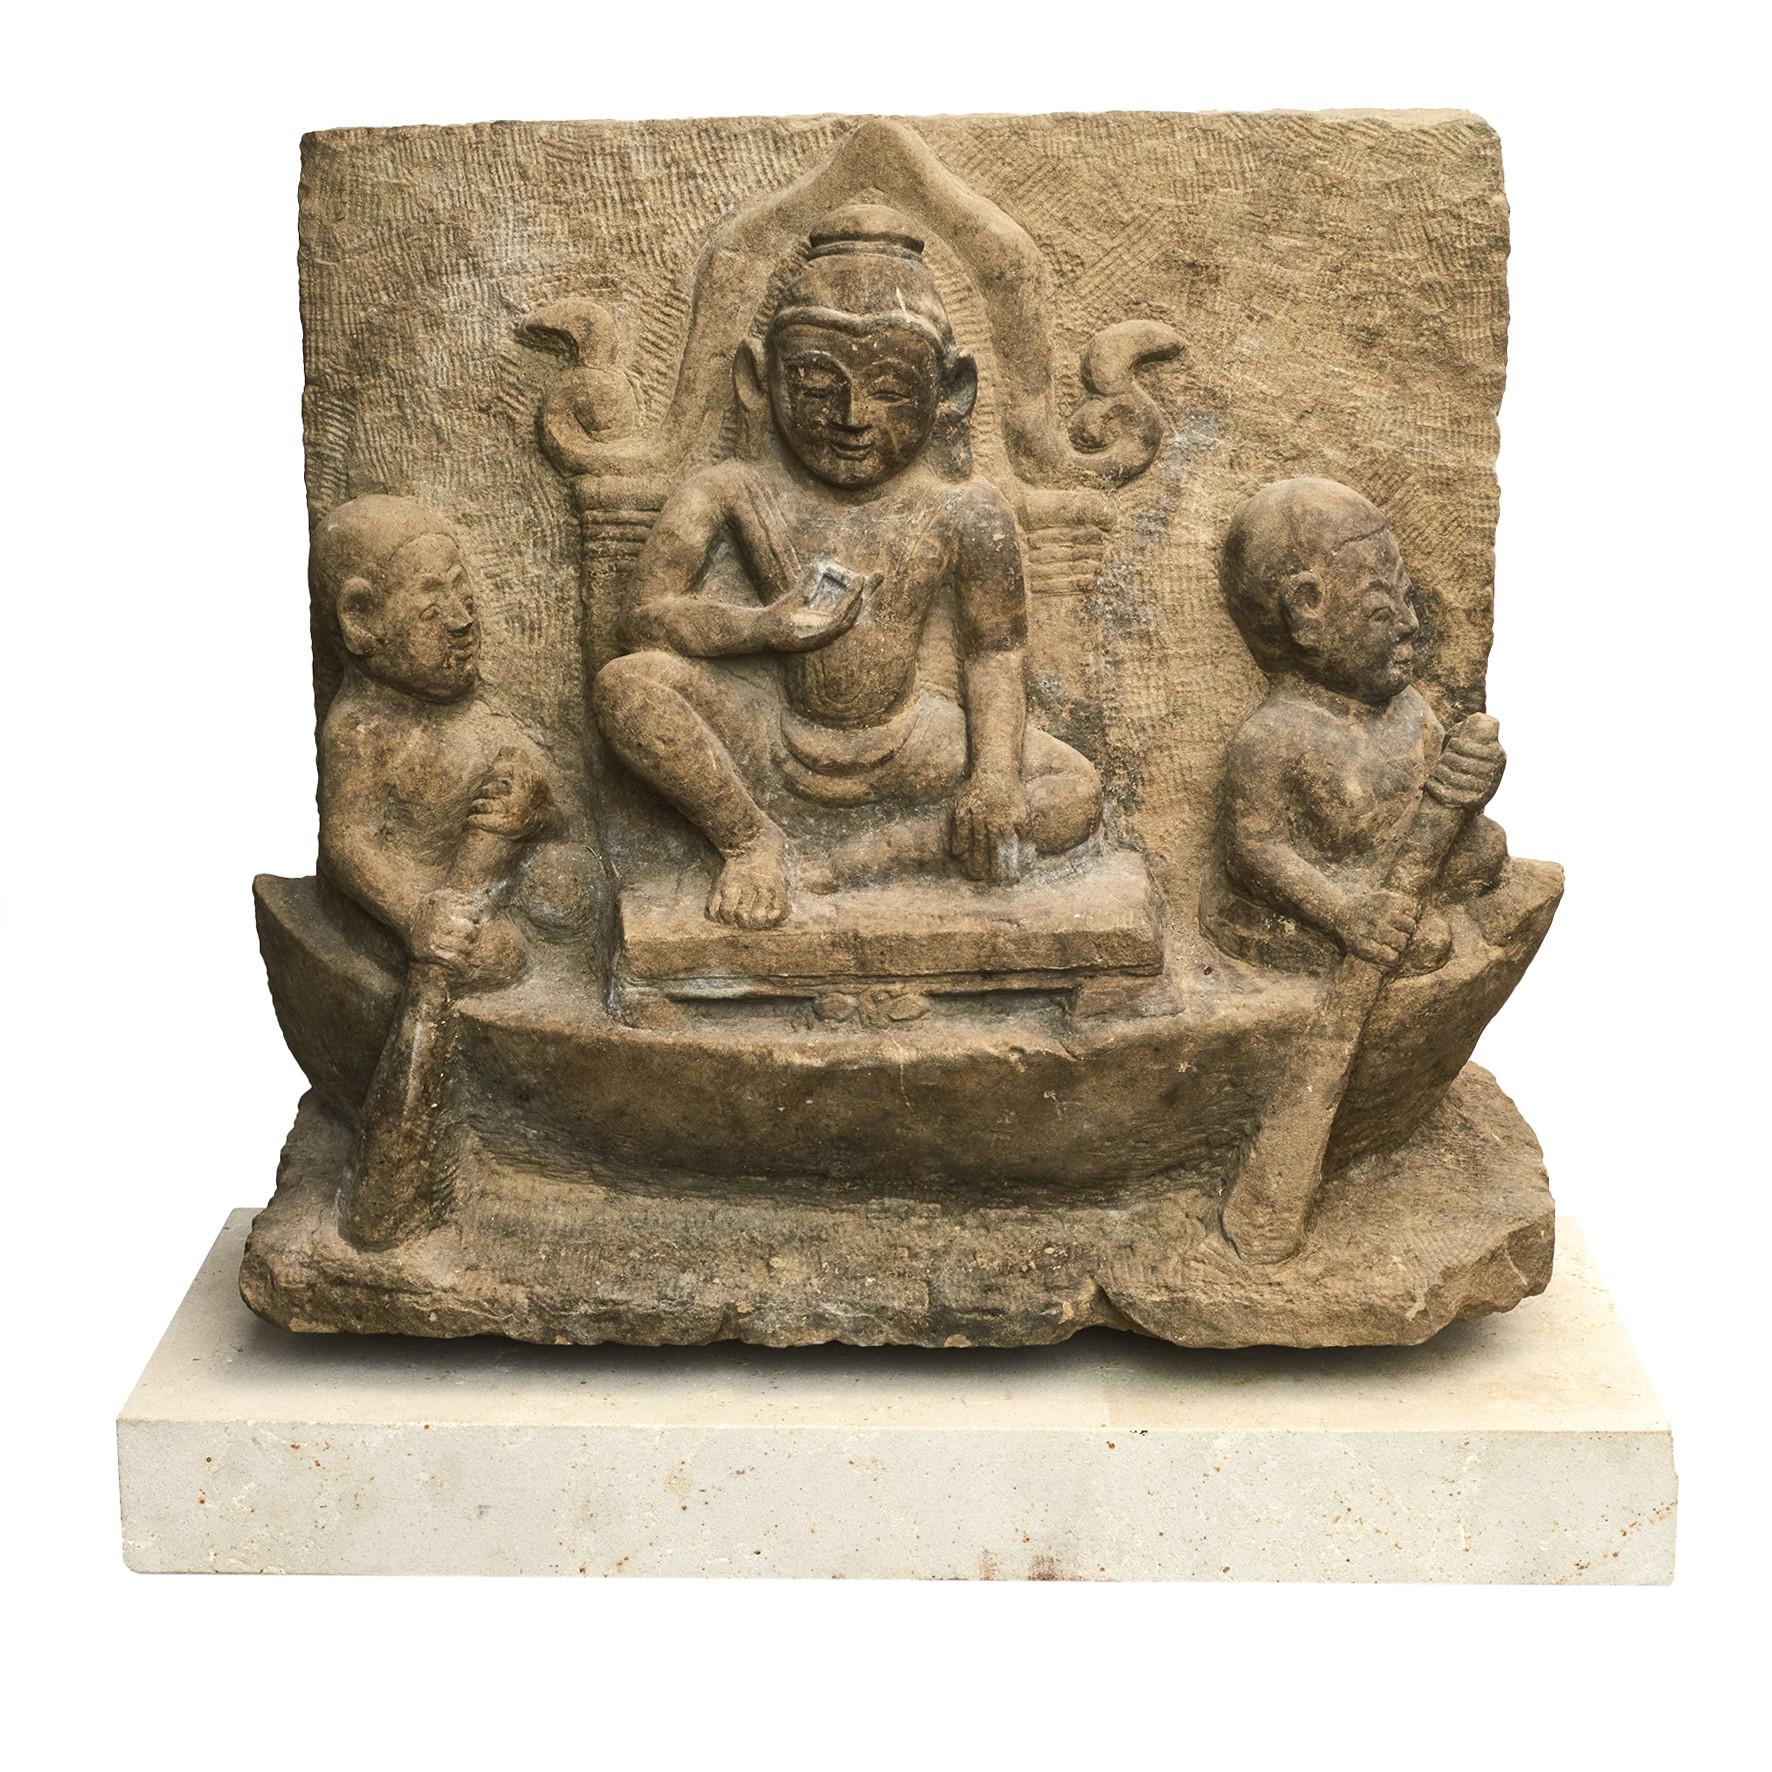 Burmese carved sandstone temple relief depicting Buddha on a throne, sitting in a boat sailed by couple of monks.
From pagoda / temple in Burma (Myanmar), Arakan Province, 1400-1500 century.
In original untouched condition. Mounted on light